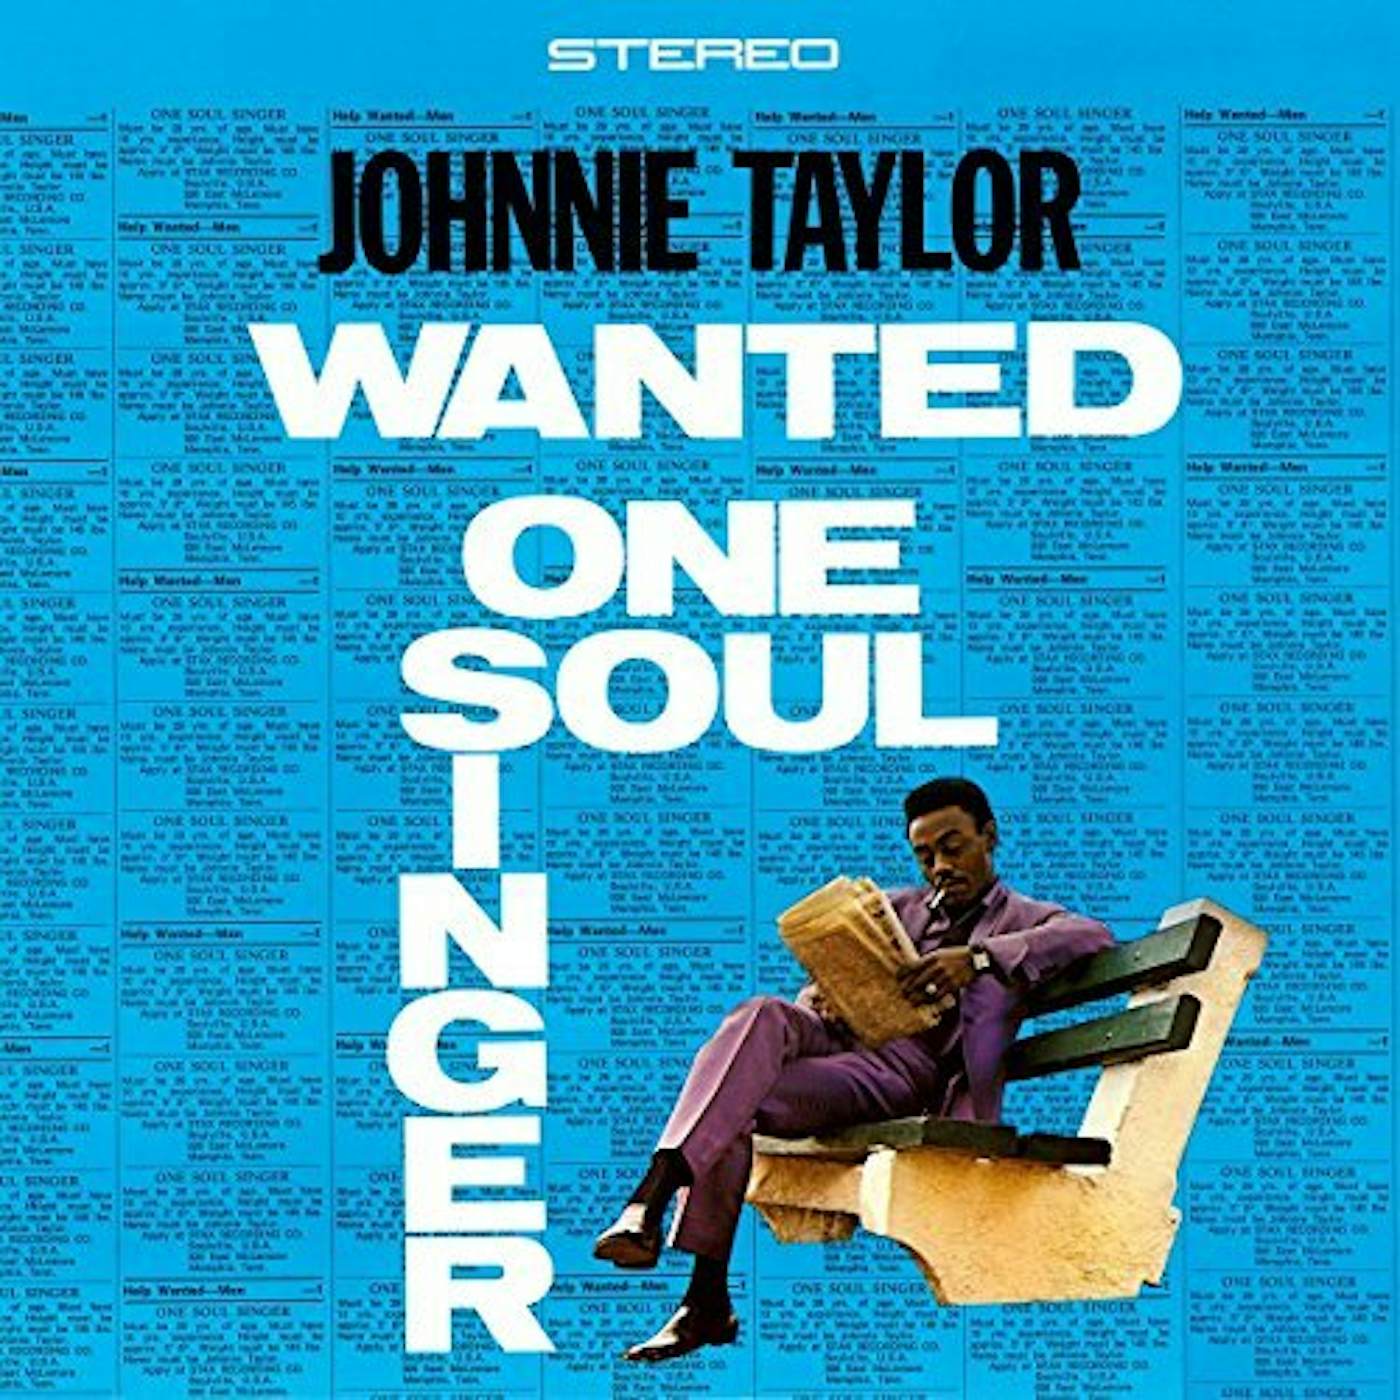 Johnnie Taylor Wanted One Soul Singer Vinyl Record